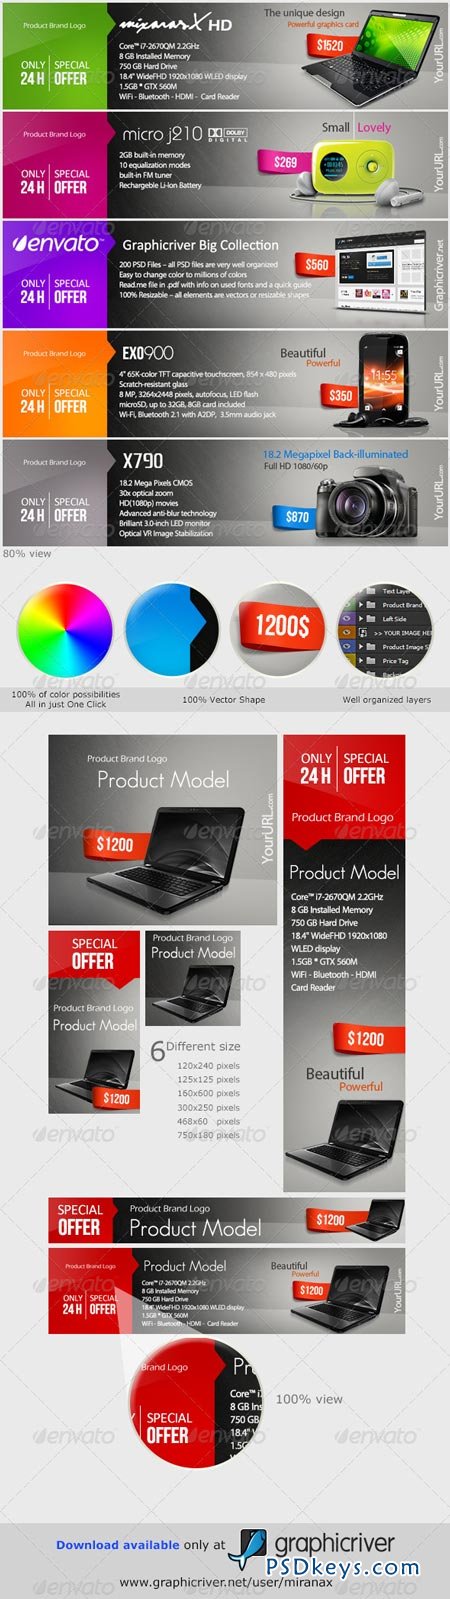 Web Marketing Banners & Advertise - PSD Templates 2772833